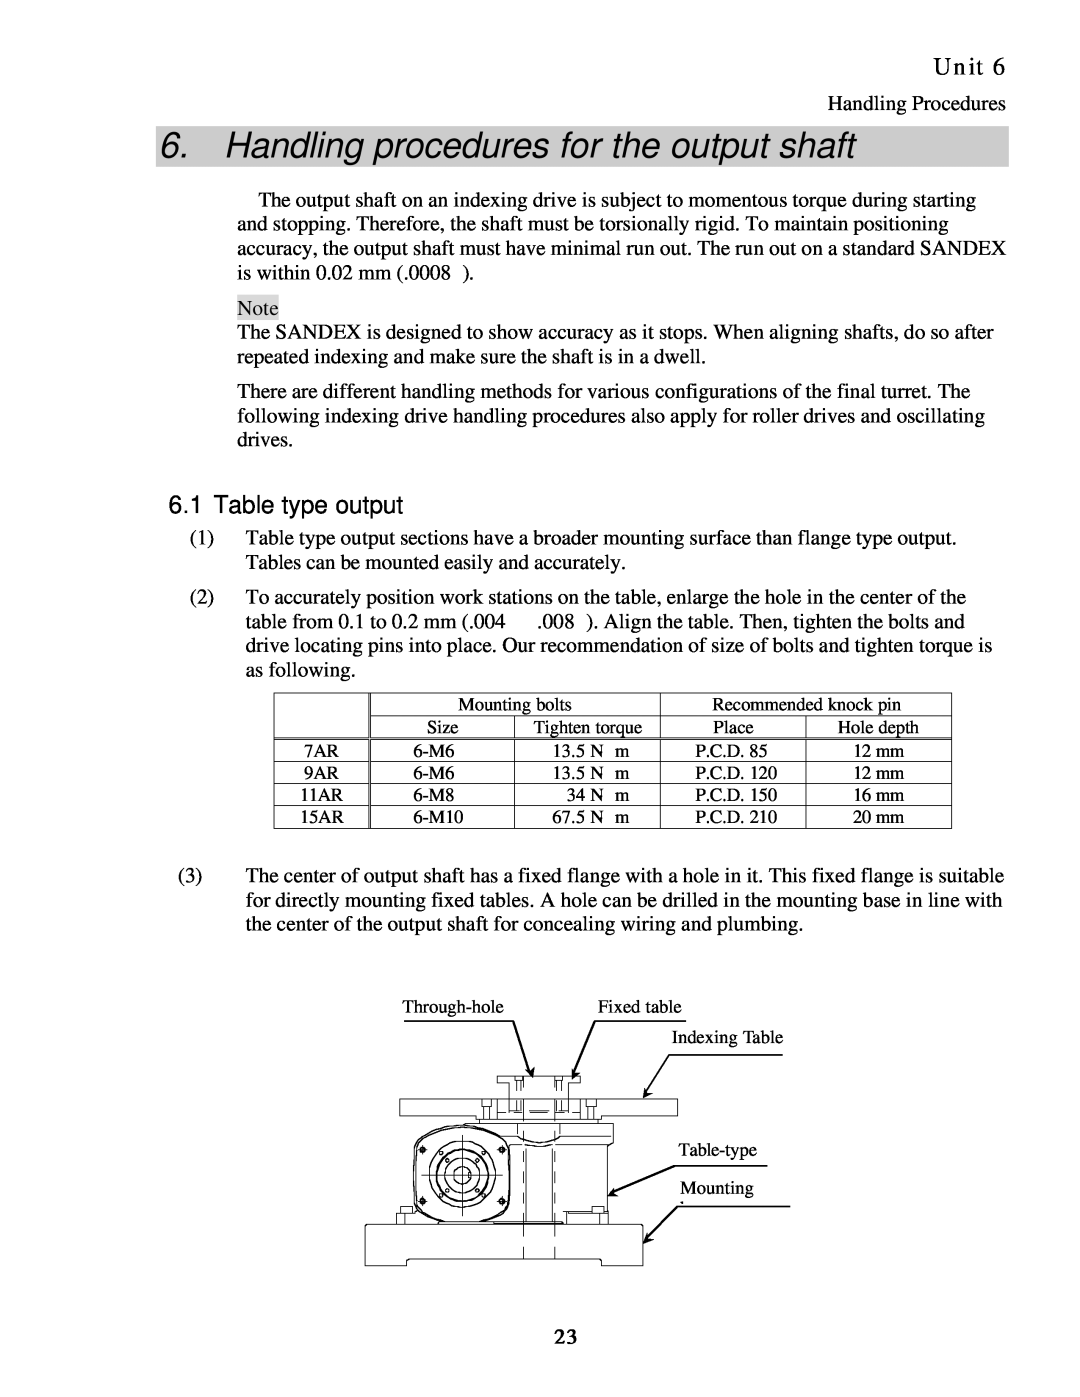 Sankyo 11AR manual Handling procedures for the output shaft, 6.1Table type output, Unit 